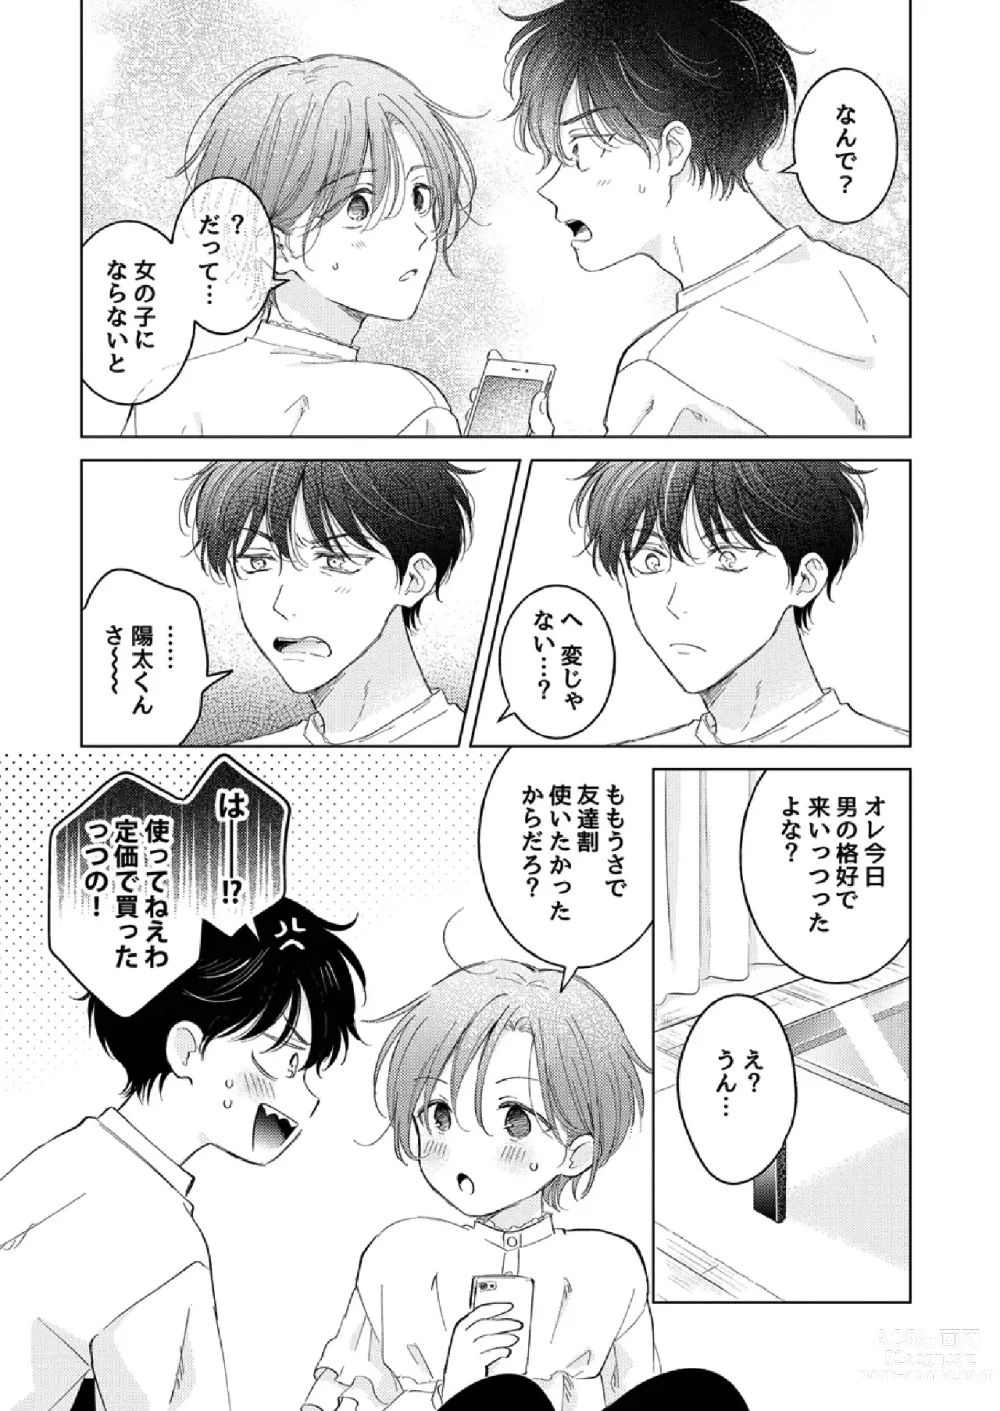 Page 13 of doujinshi How to use Gender-Changing Apps Properly 2